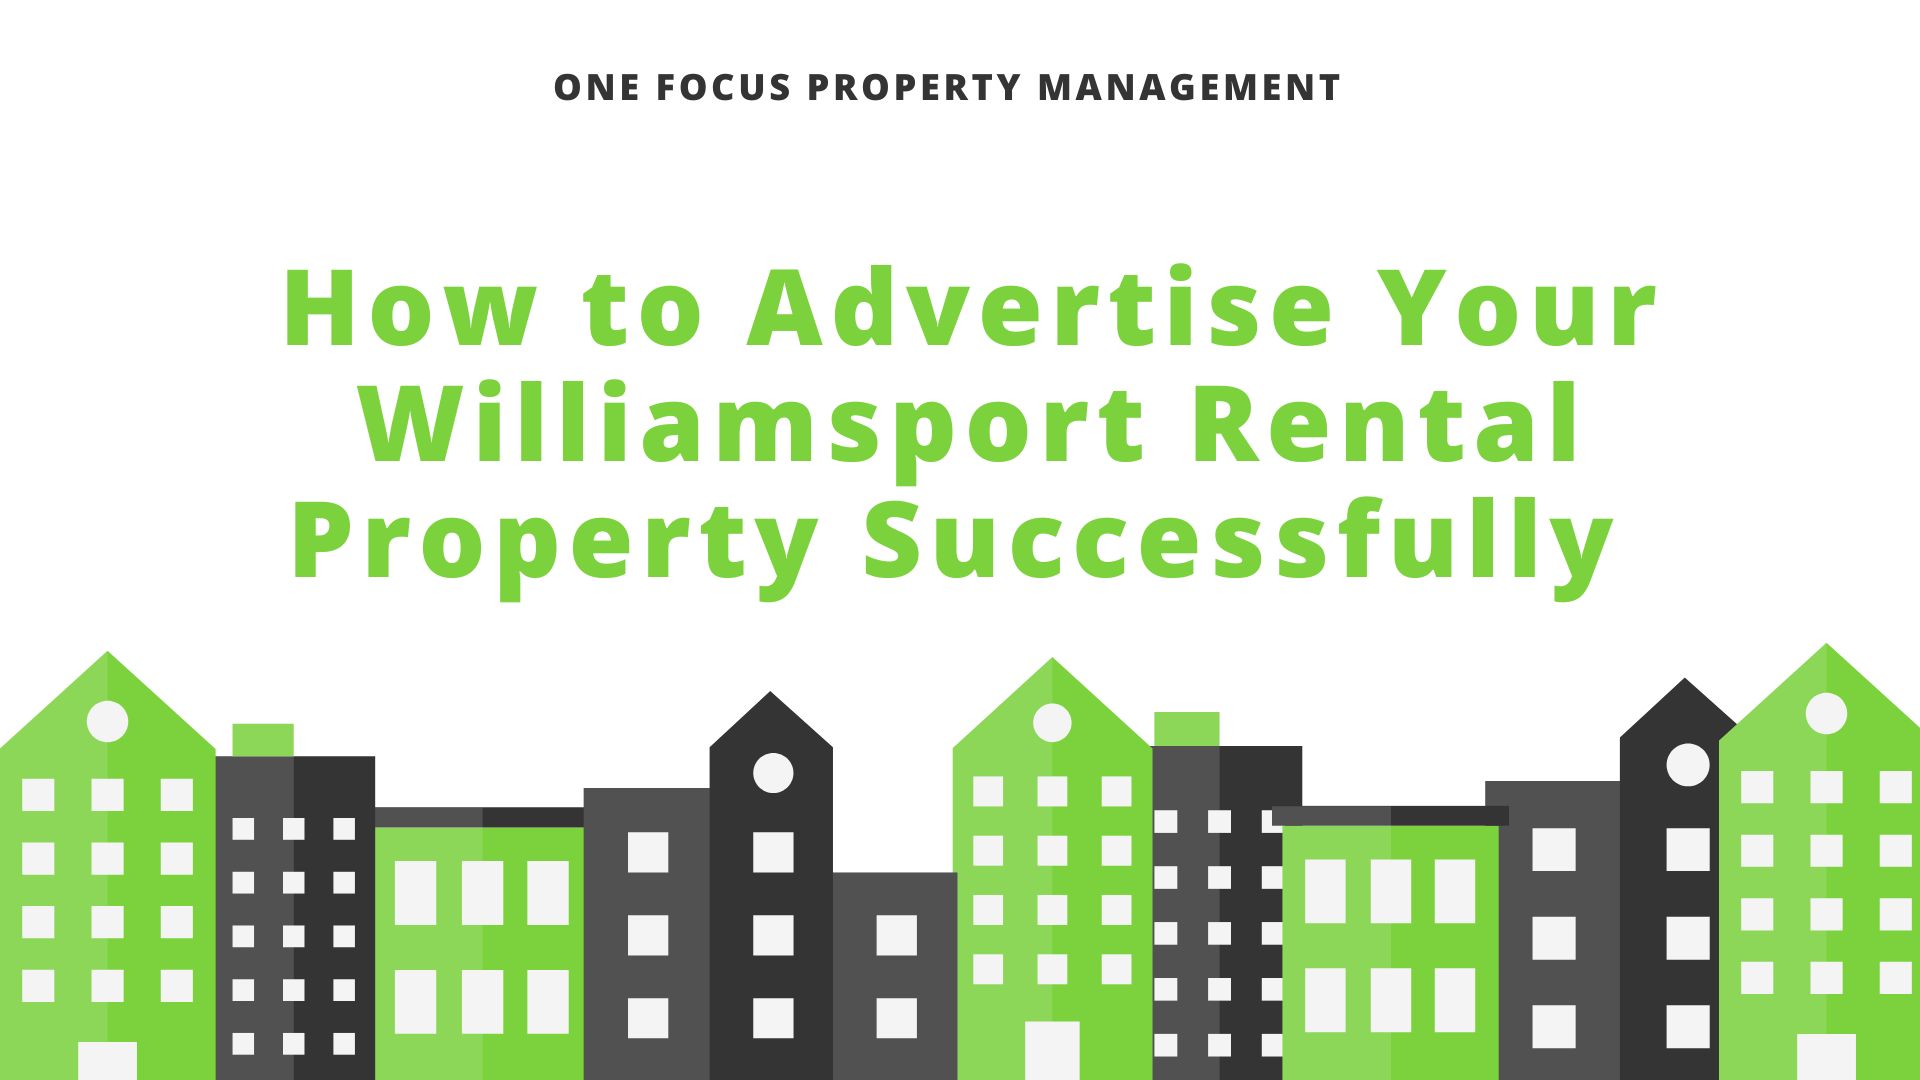 How to Advertise Your Williamsport Rental Property Successfully